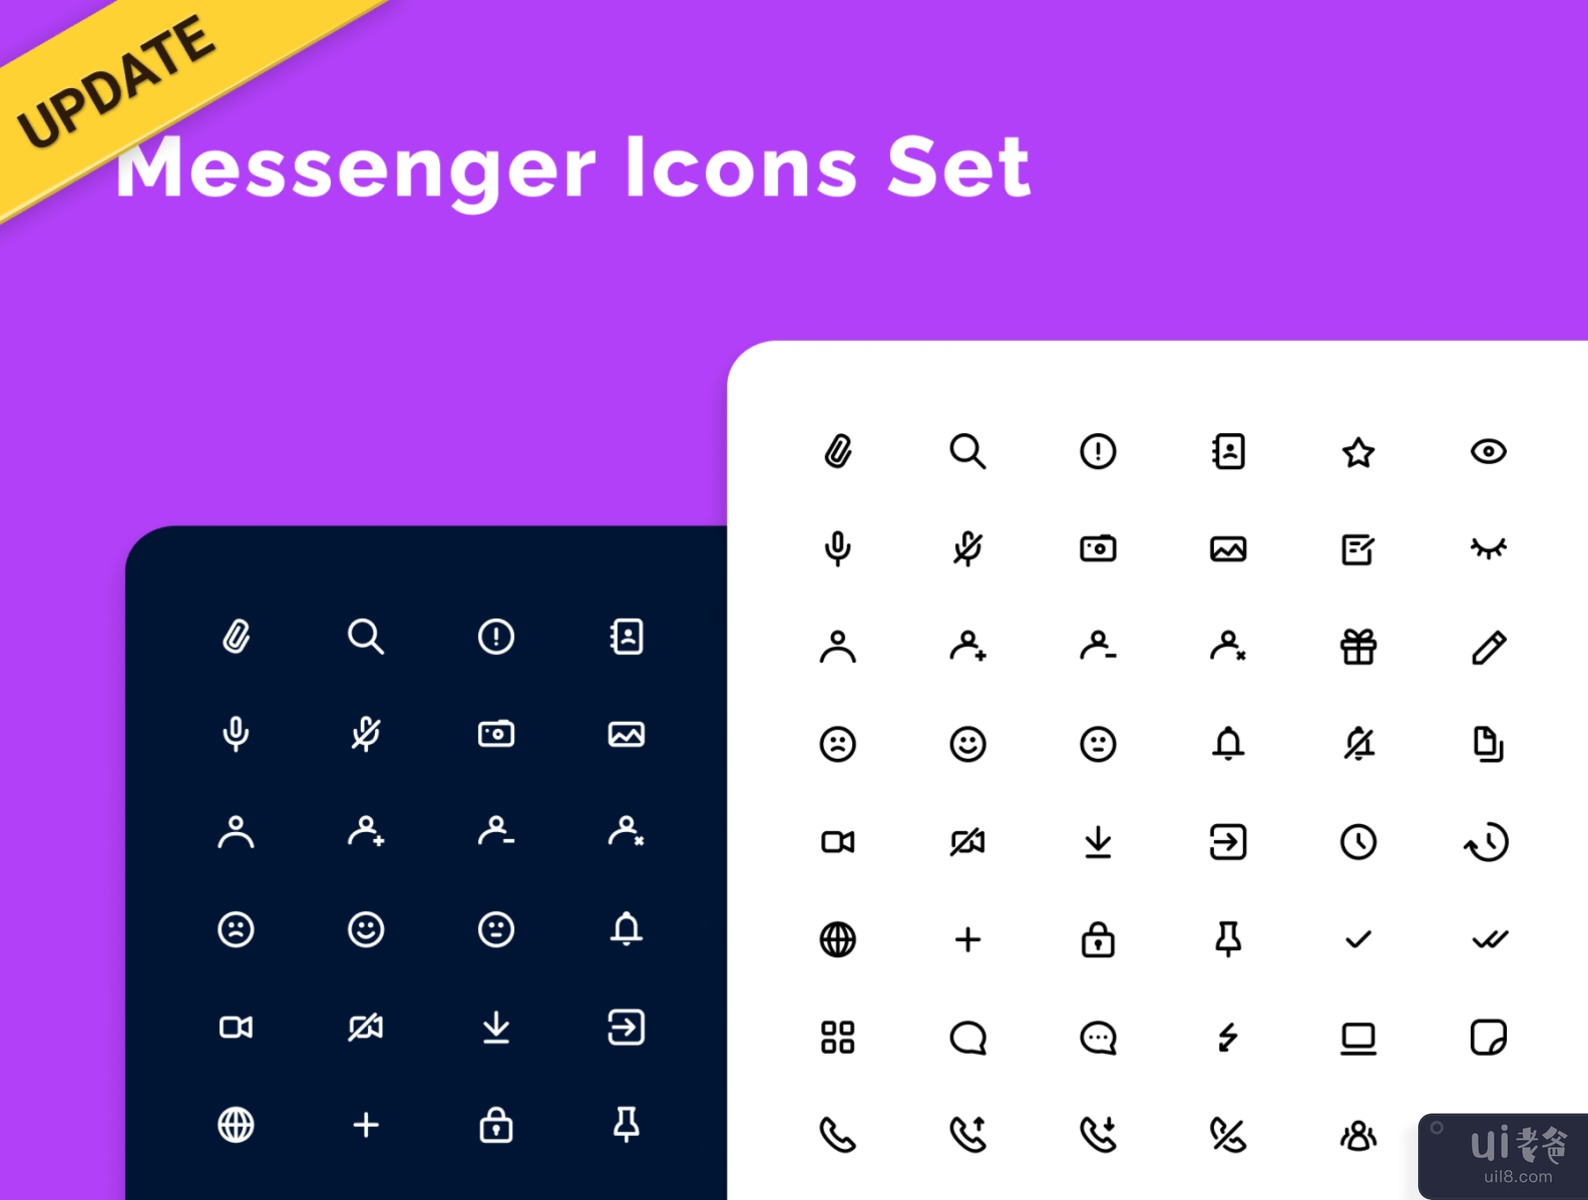 Chat and Messenger Icons Set - update!